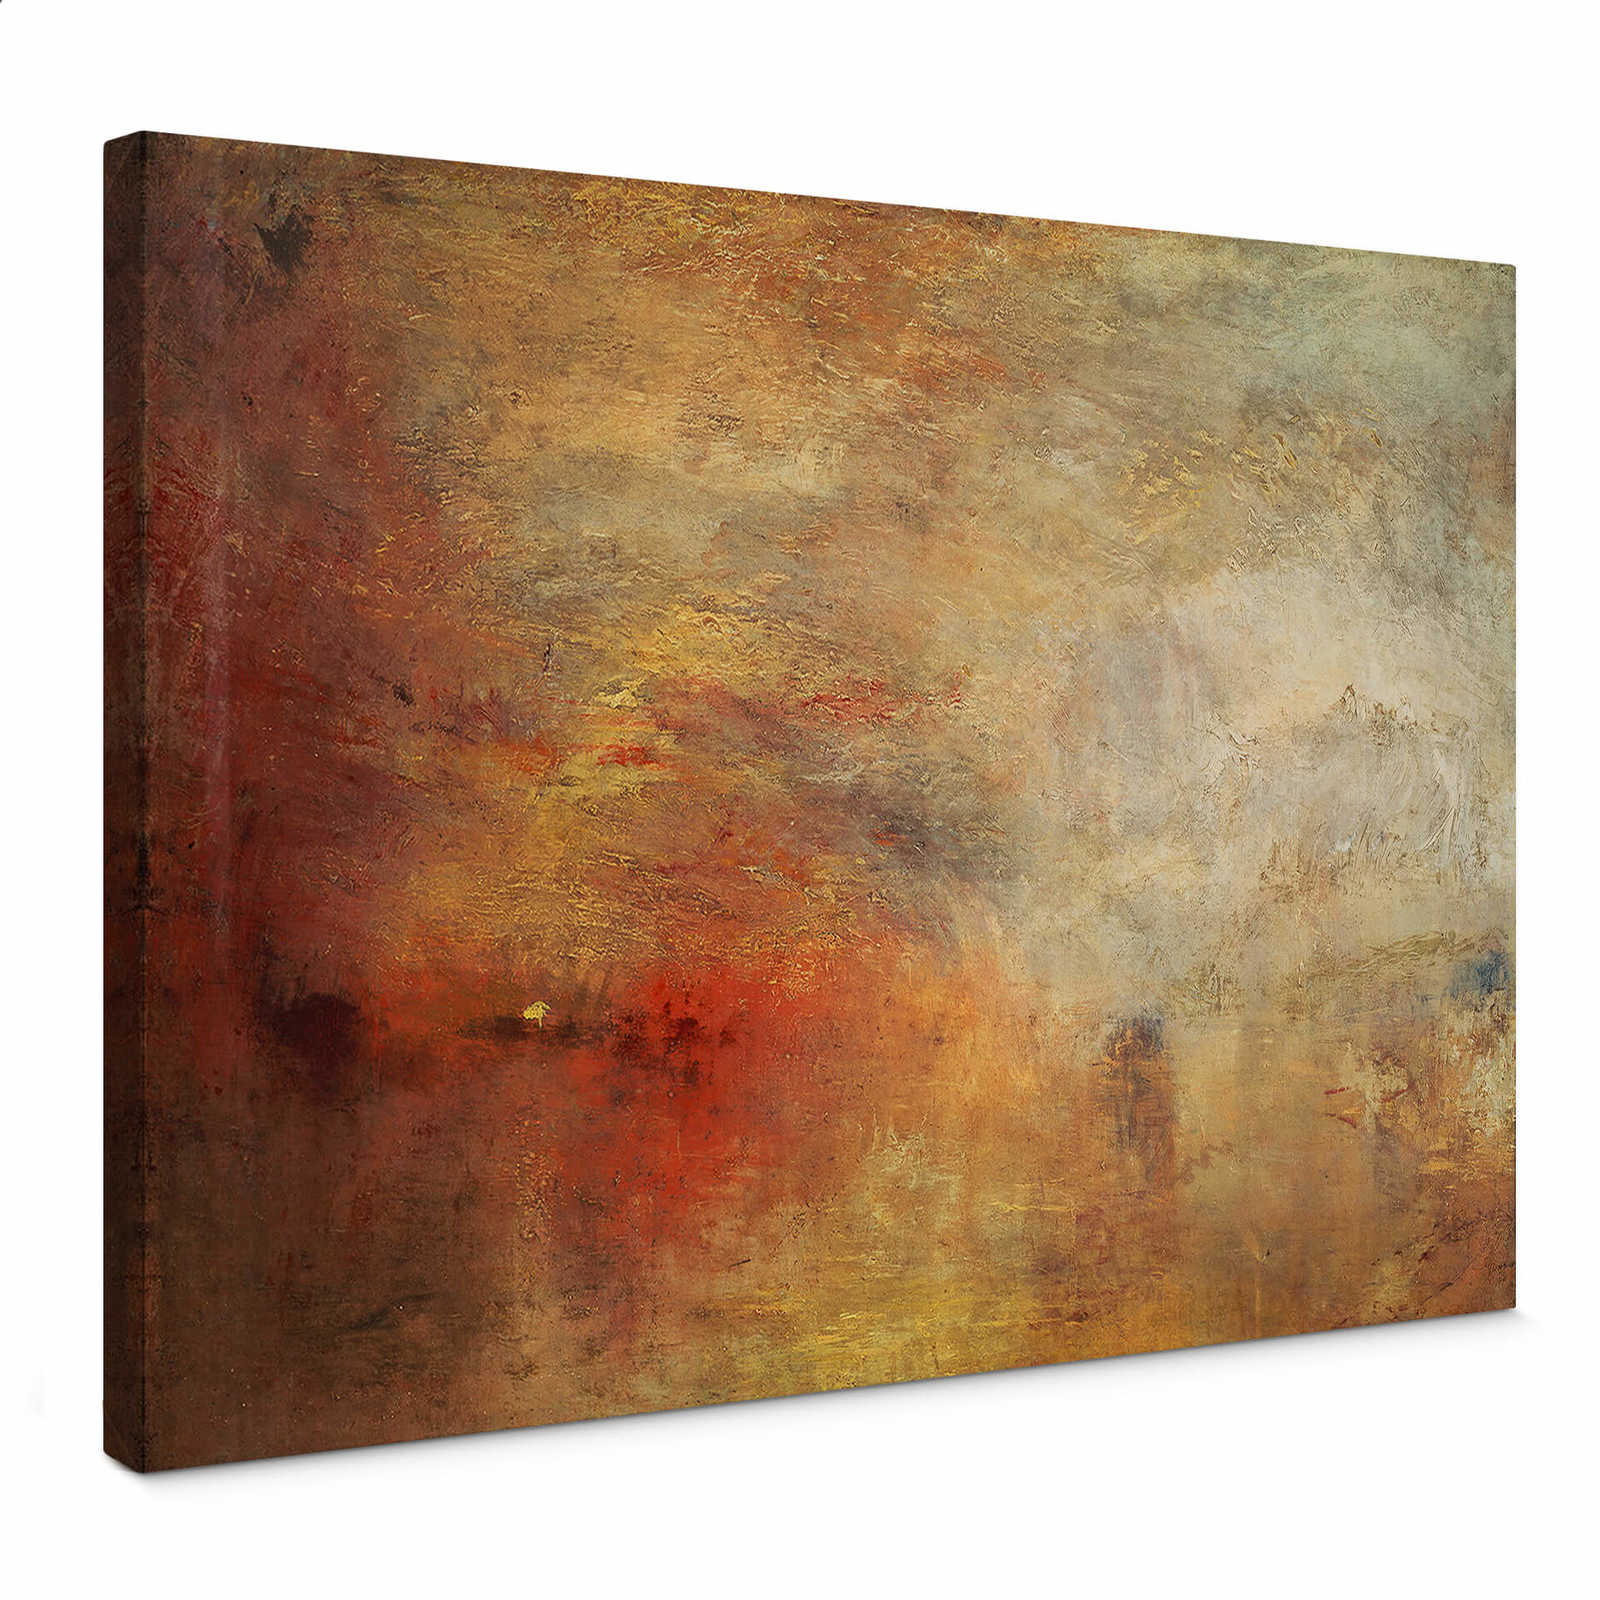         Canvas print "Sunset over the sea" by Turner
    